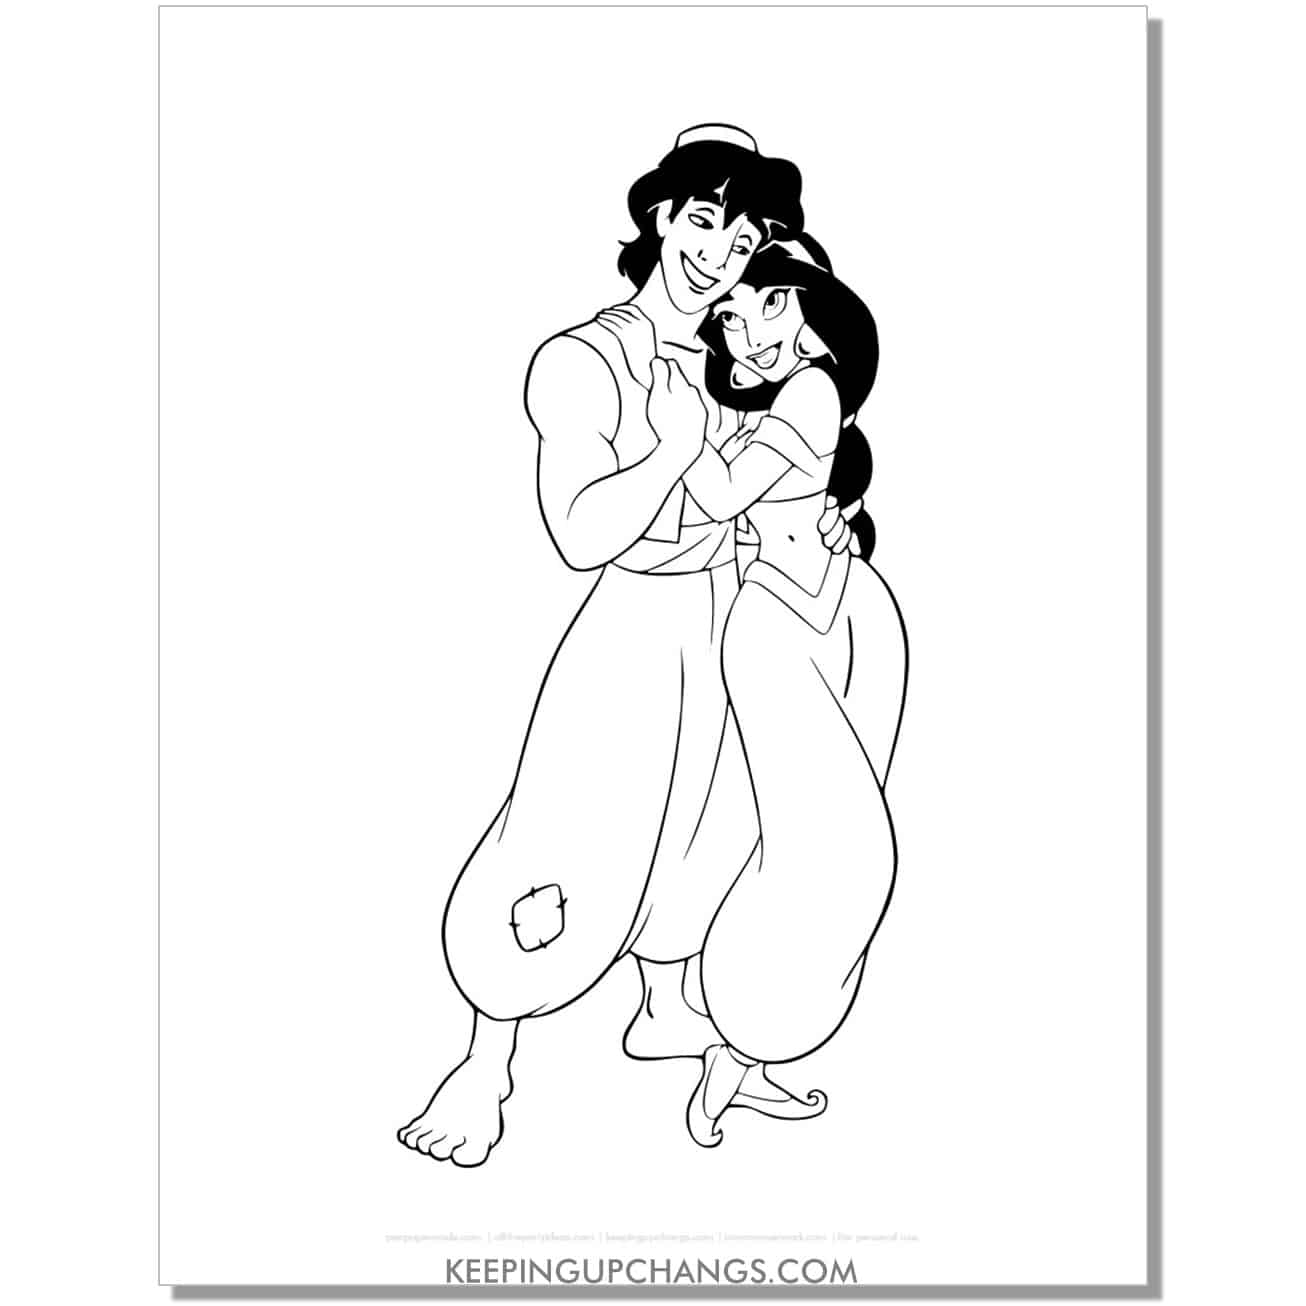 jasmine hugging aladdin in civilian clothes coloring page, sheet.